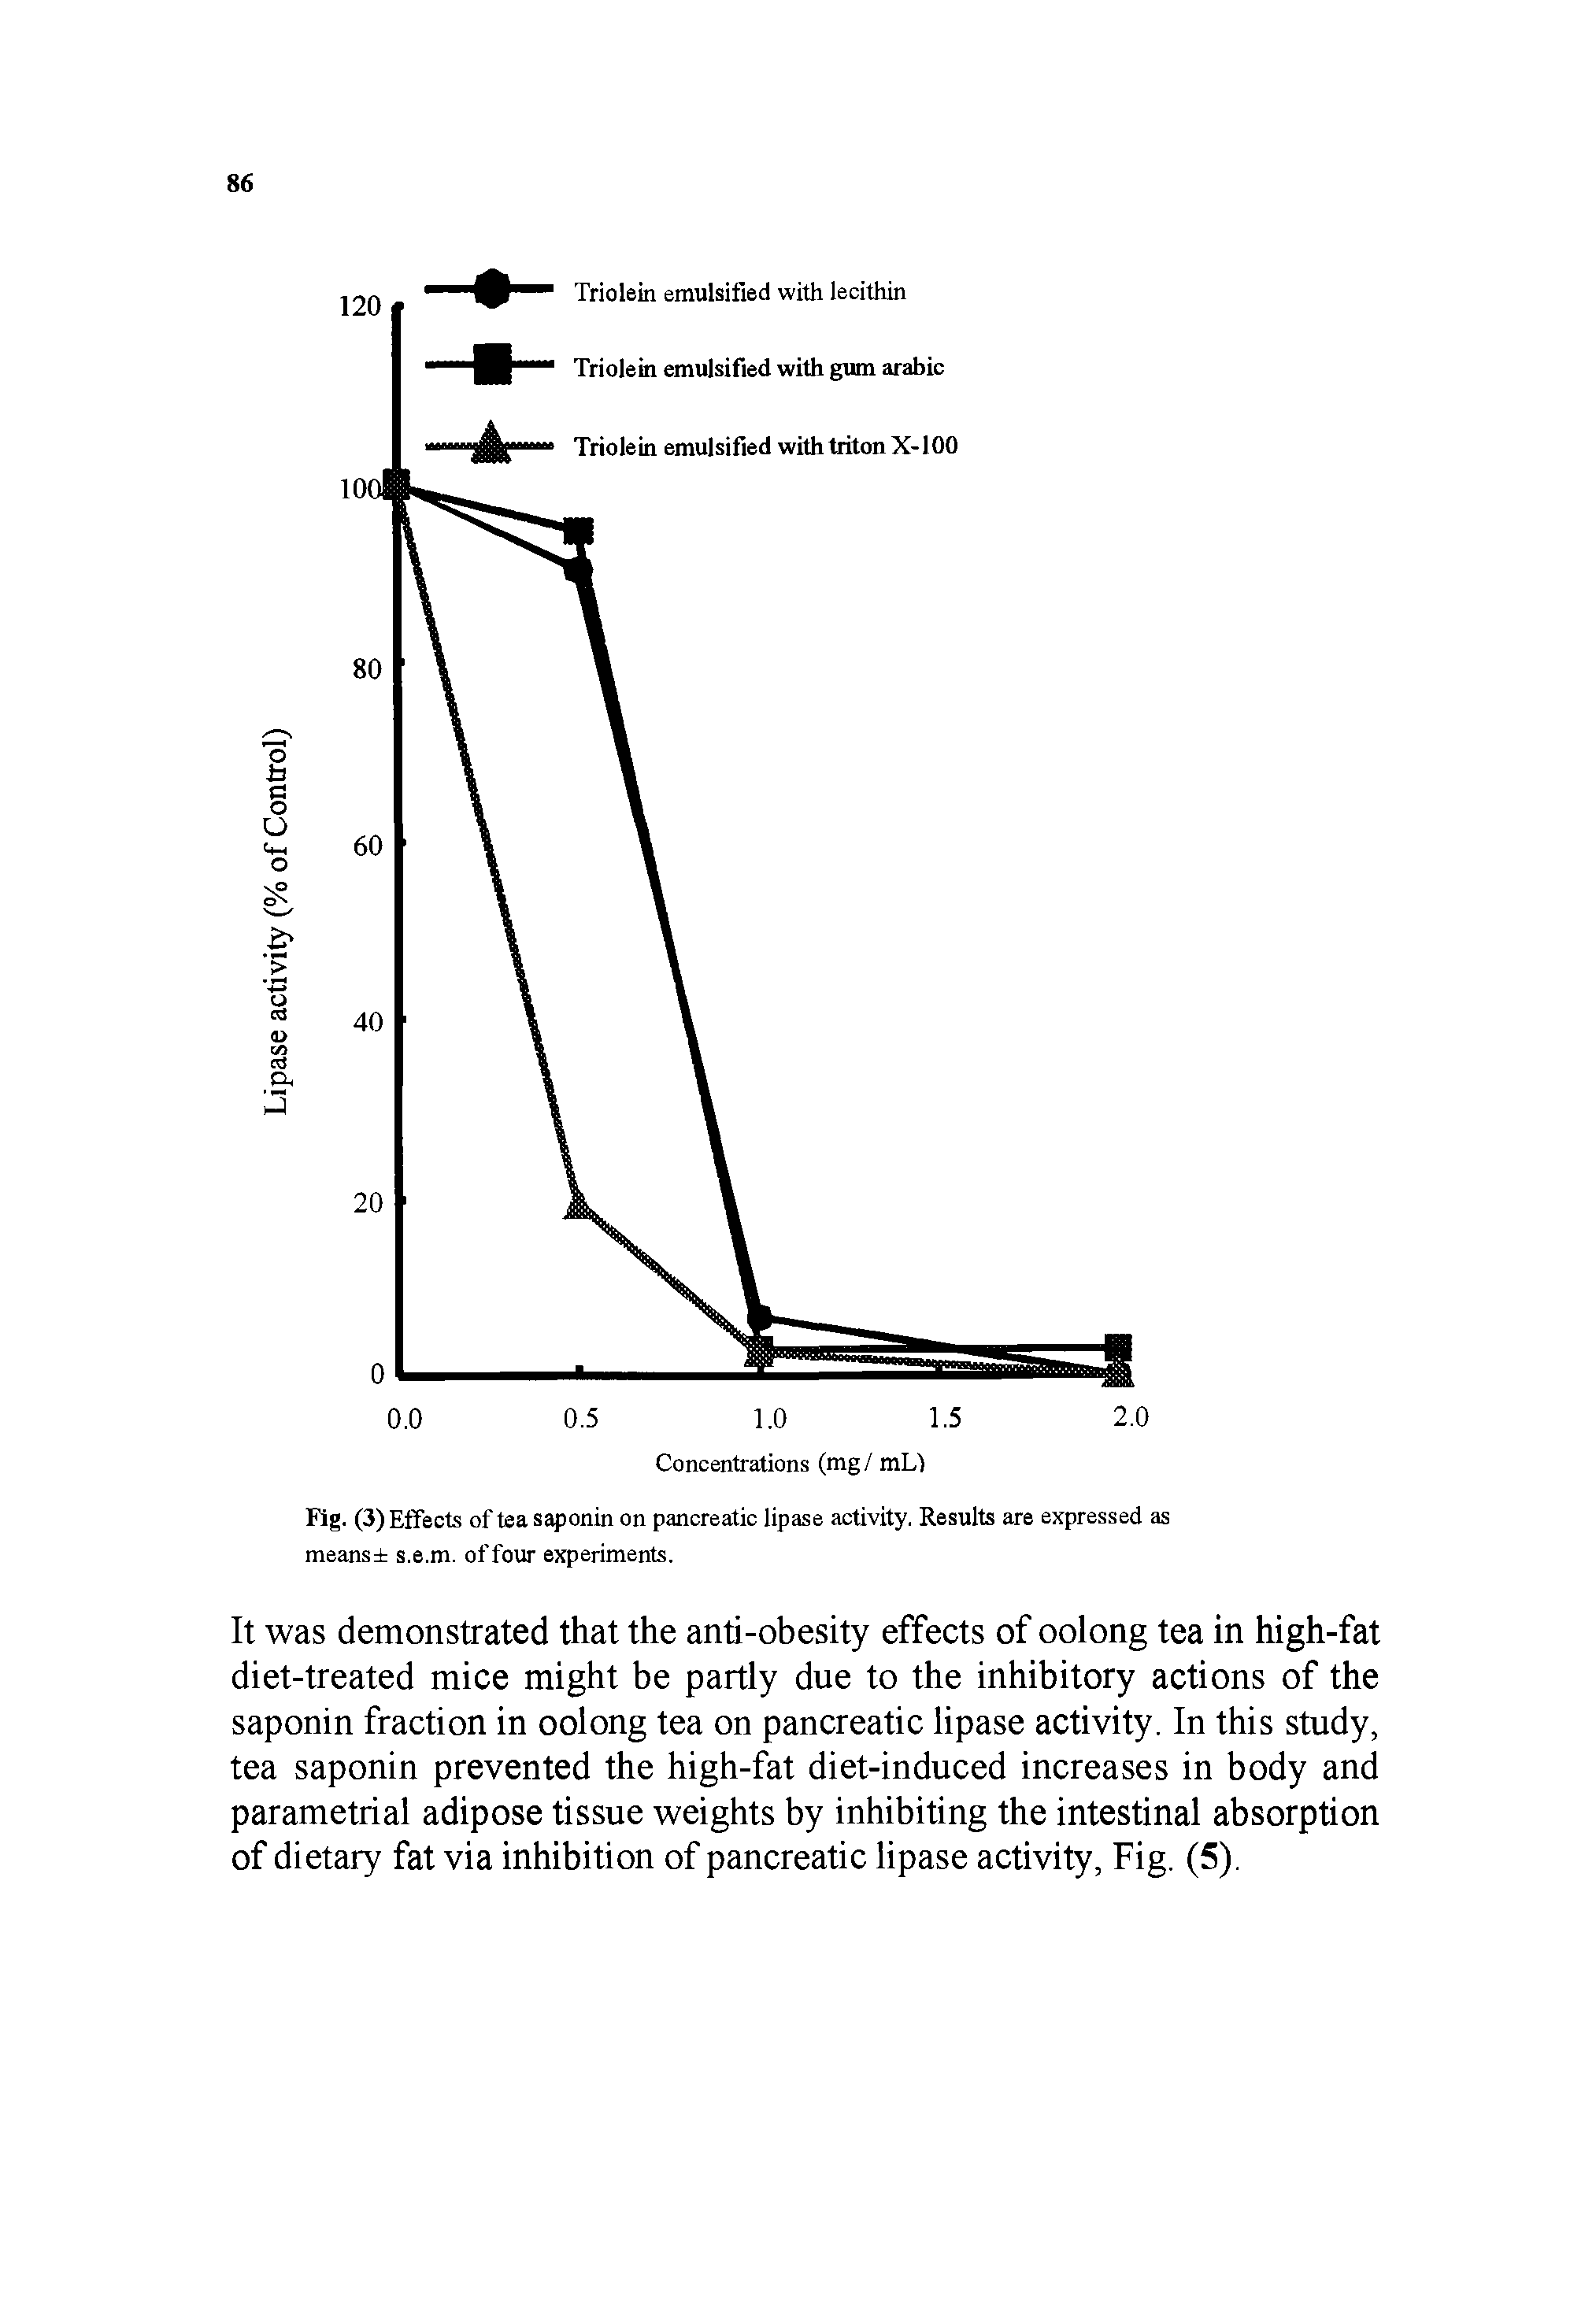 Fig. (3) Effects of tea saponin on pancreatic lipase activity. Results are expressed as means- s.e.m. offour experiments.